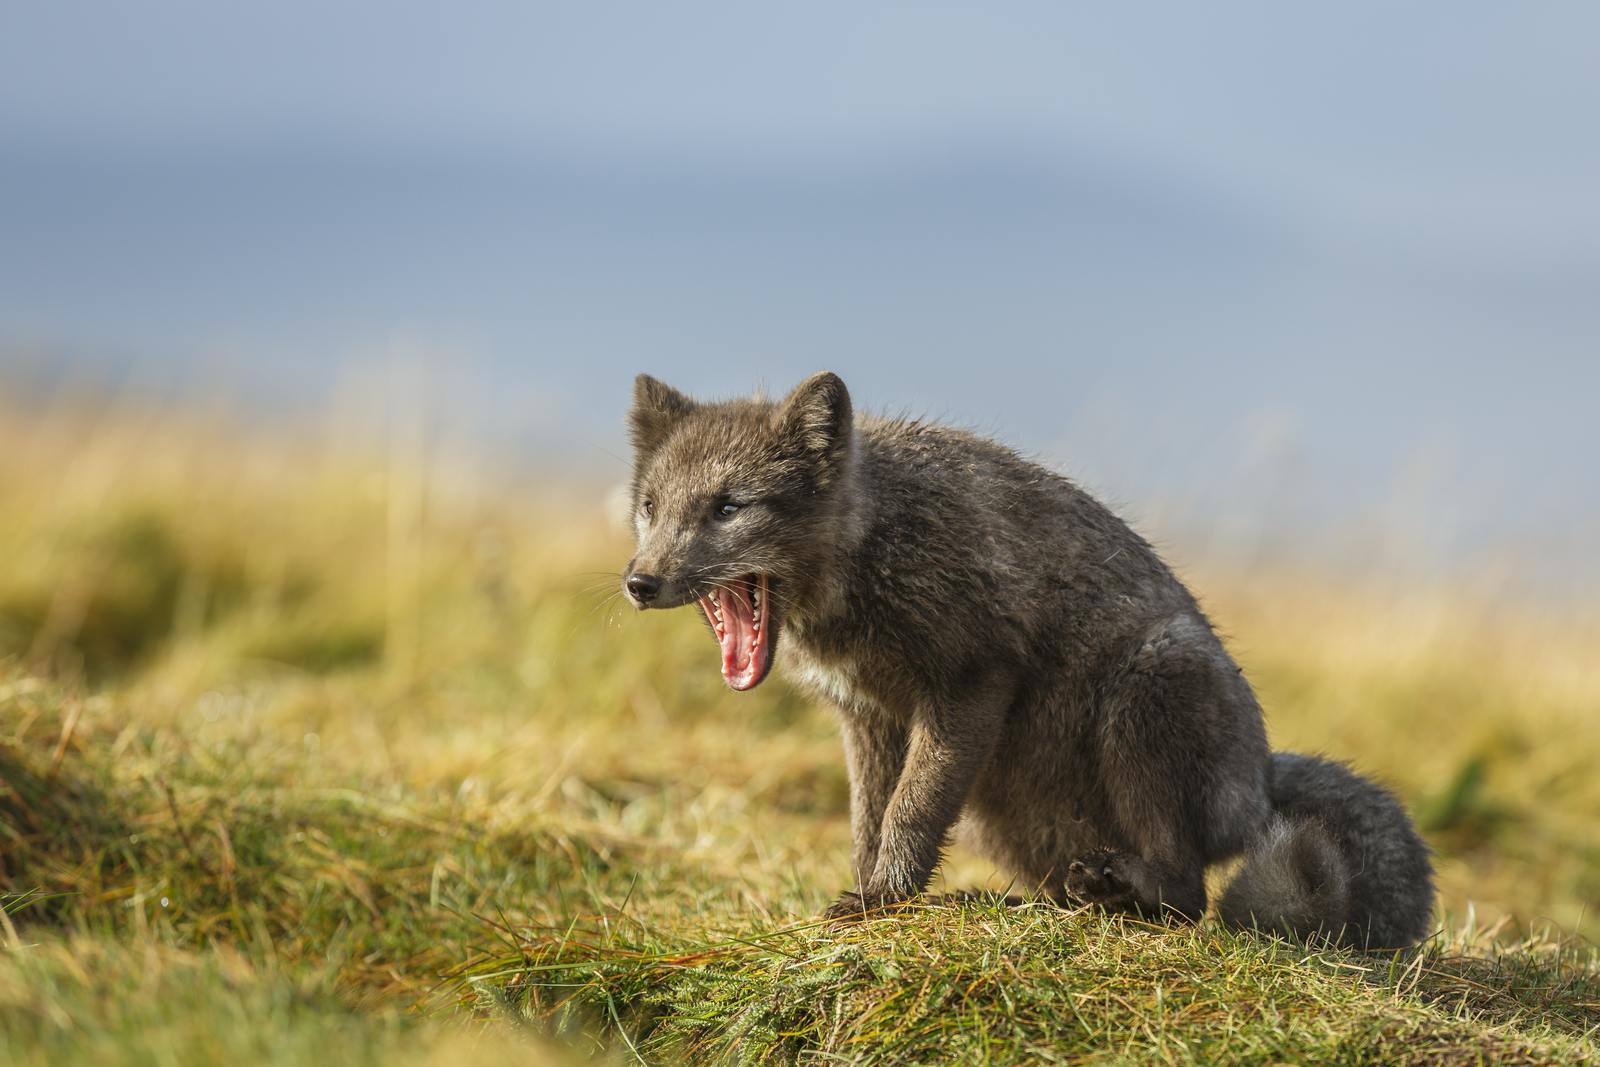 Artic fox in Iceland